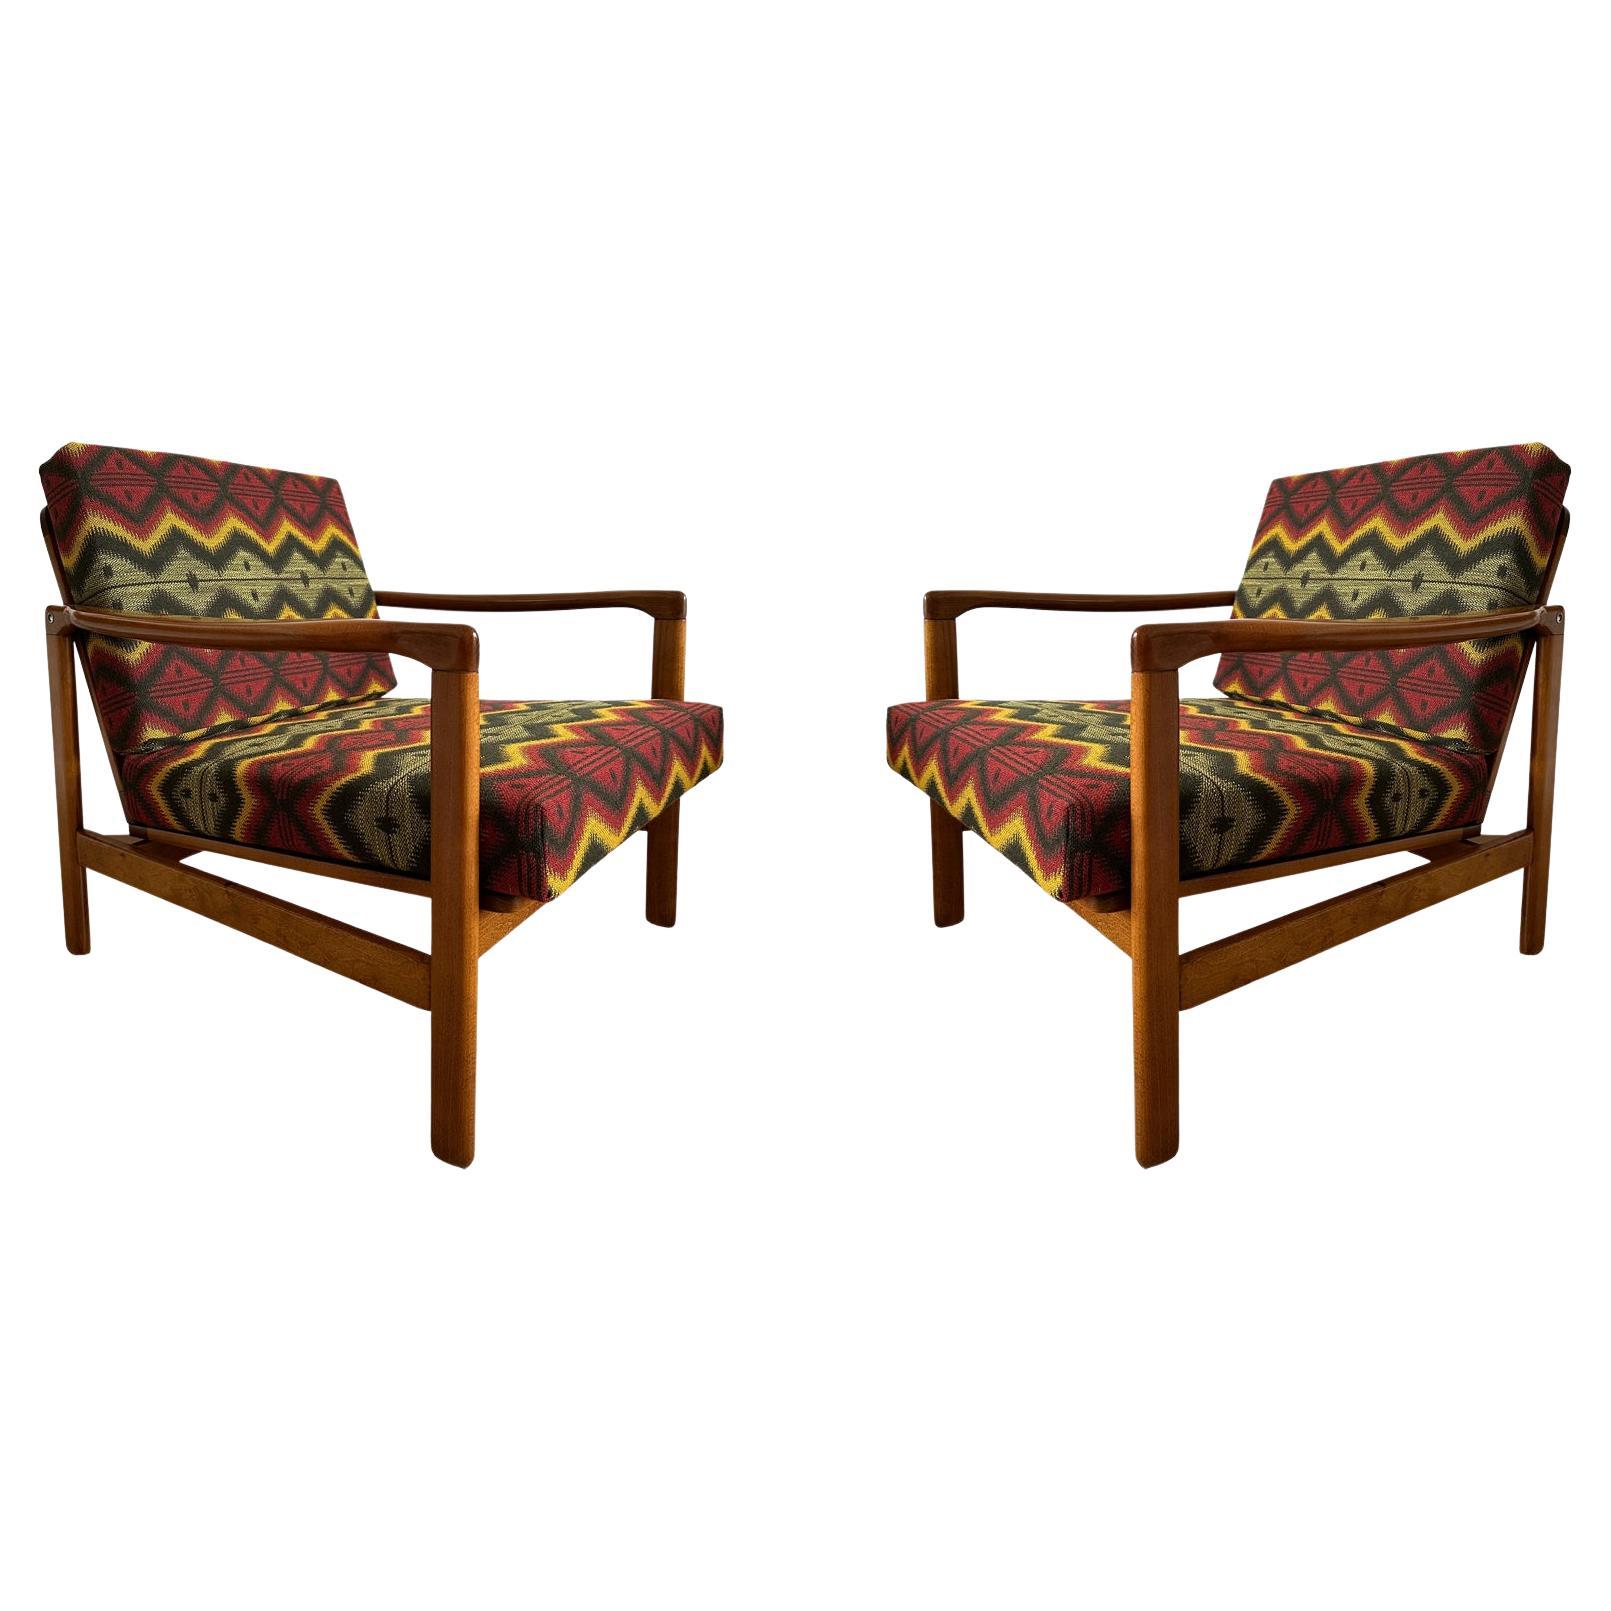 Set of Two Armchairs by Zenon Bączyk, Mind the Gap Upholstery, Europe, 1960s For Sale